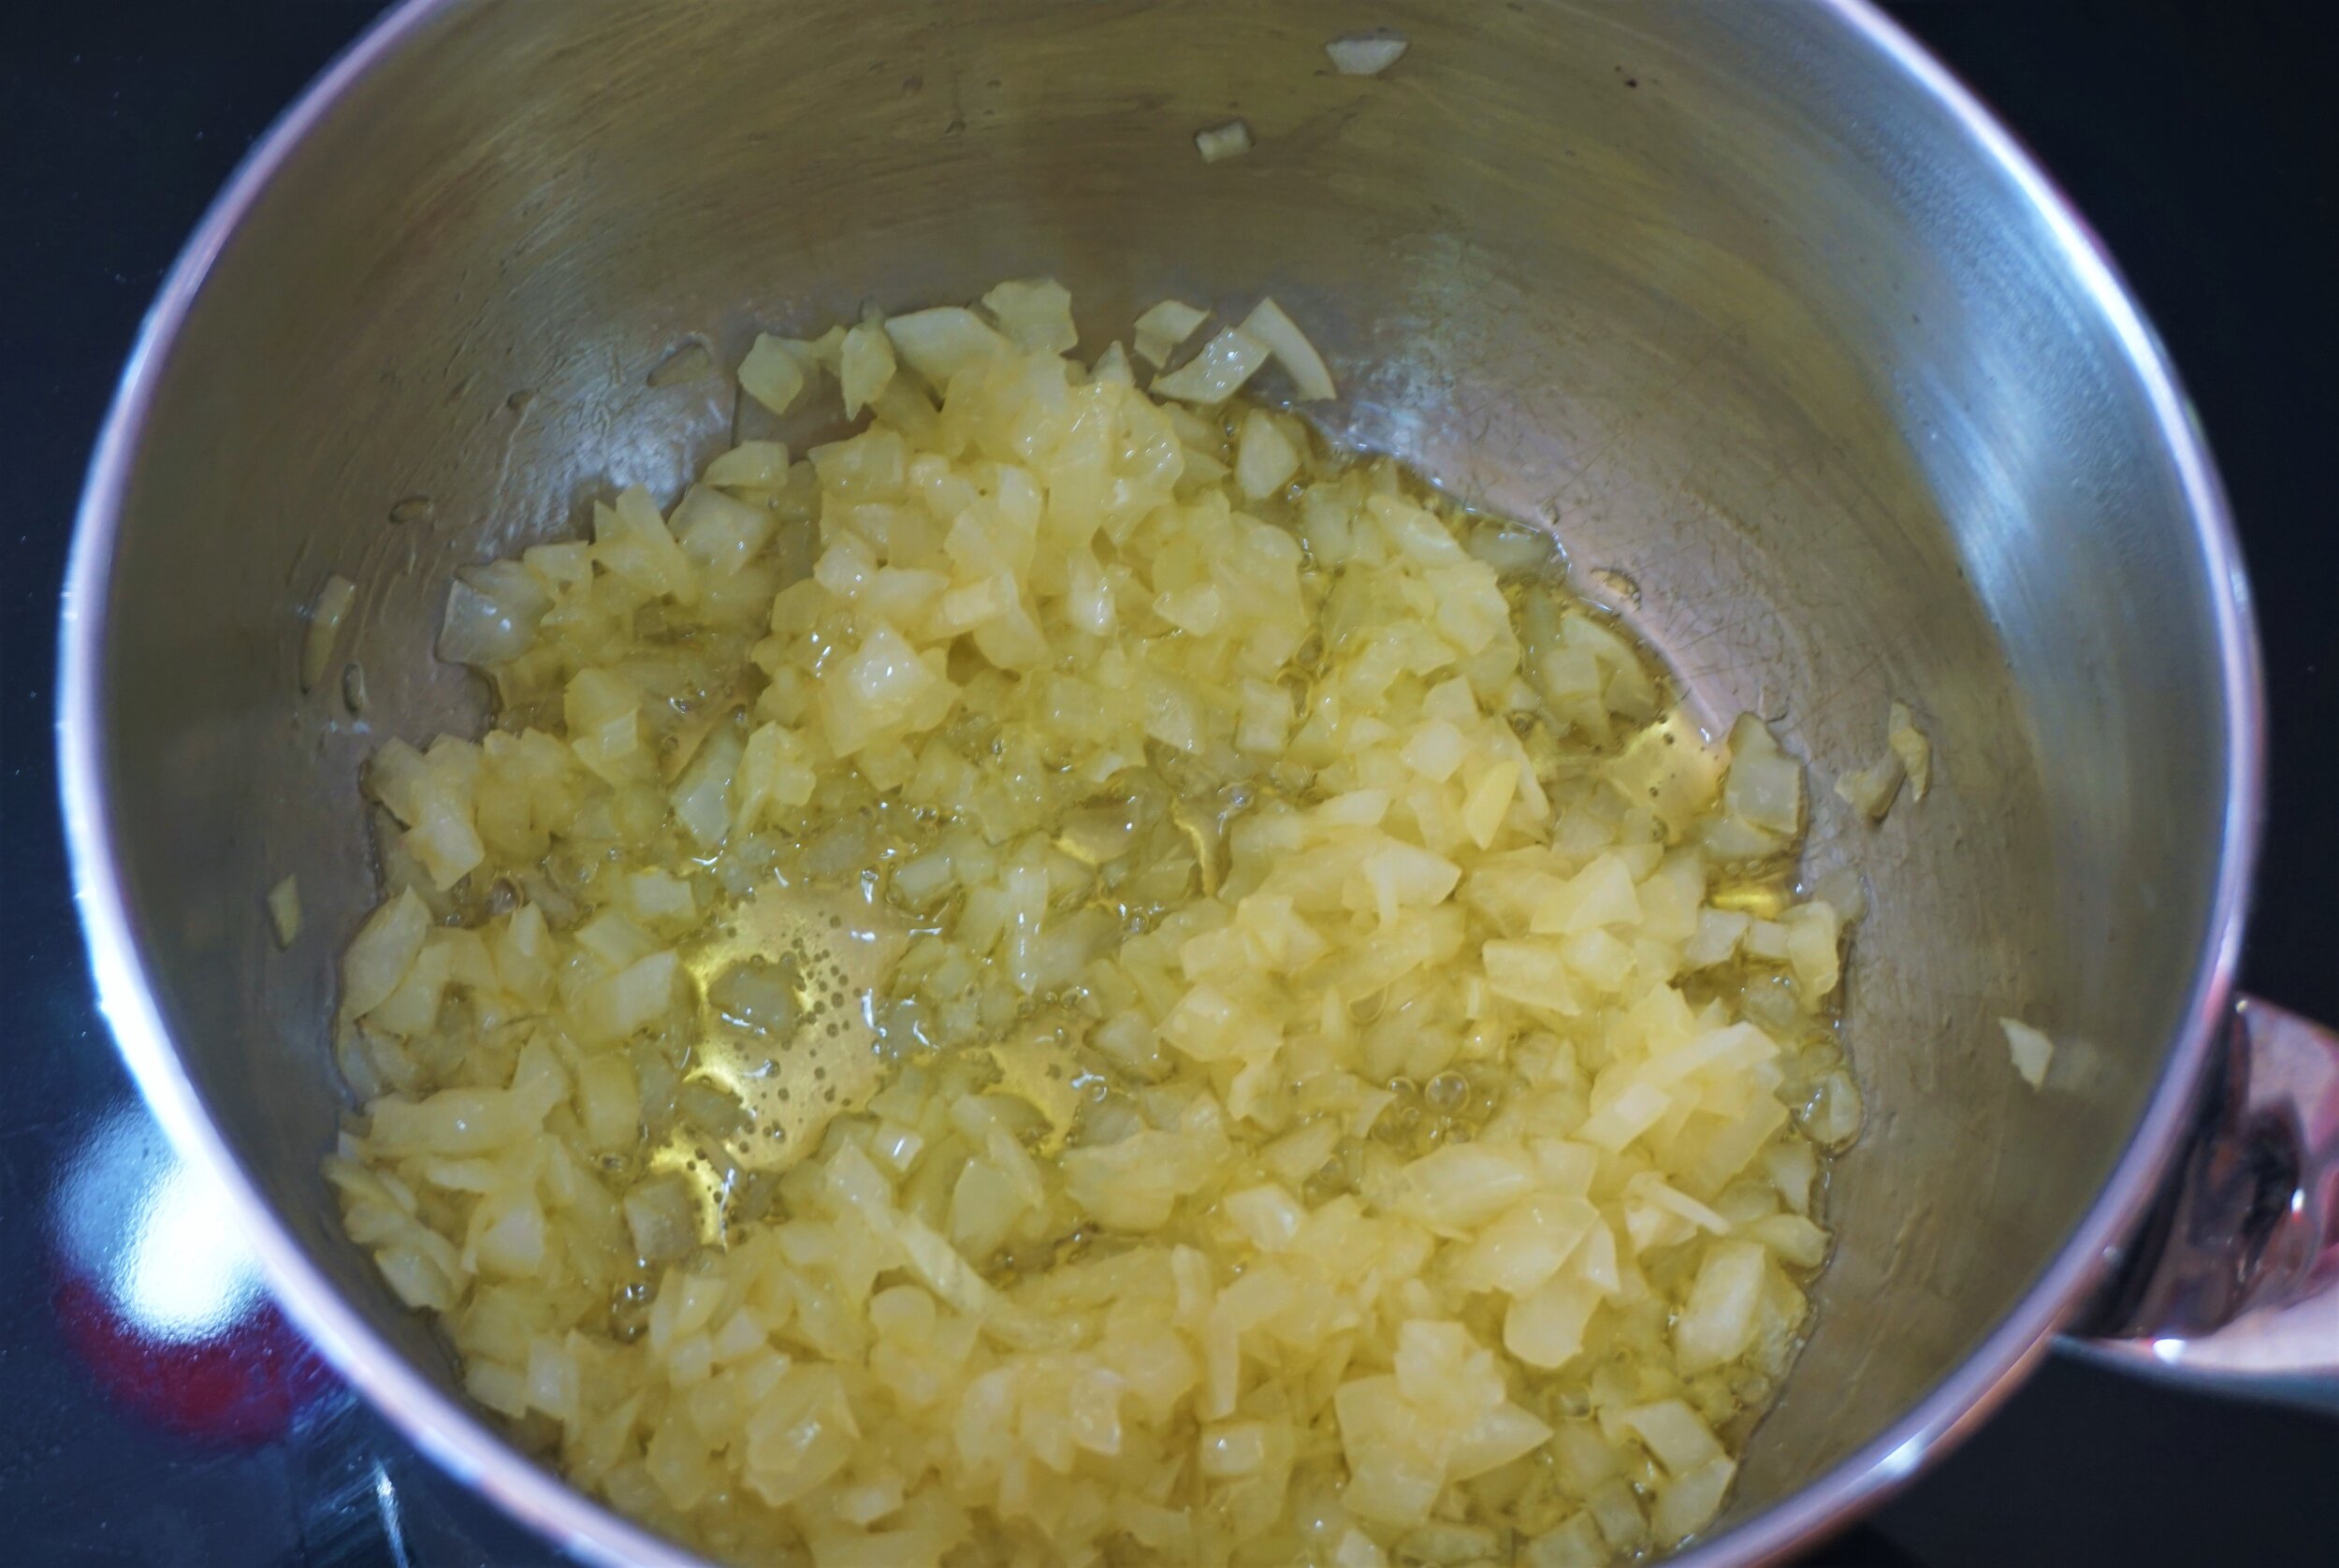 Cook the diced onion in olive oil until transluscent.